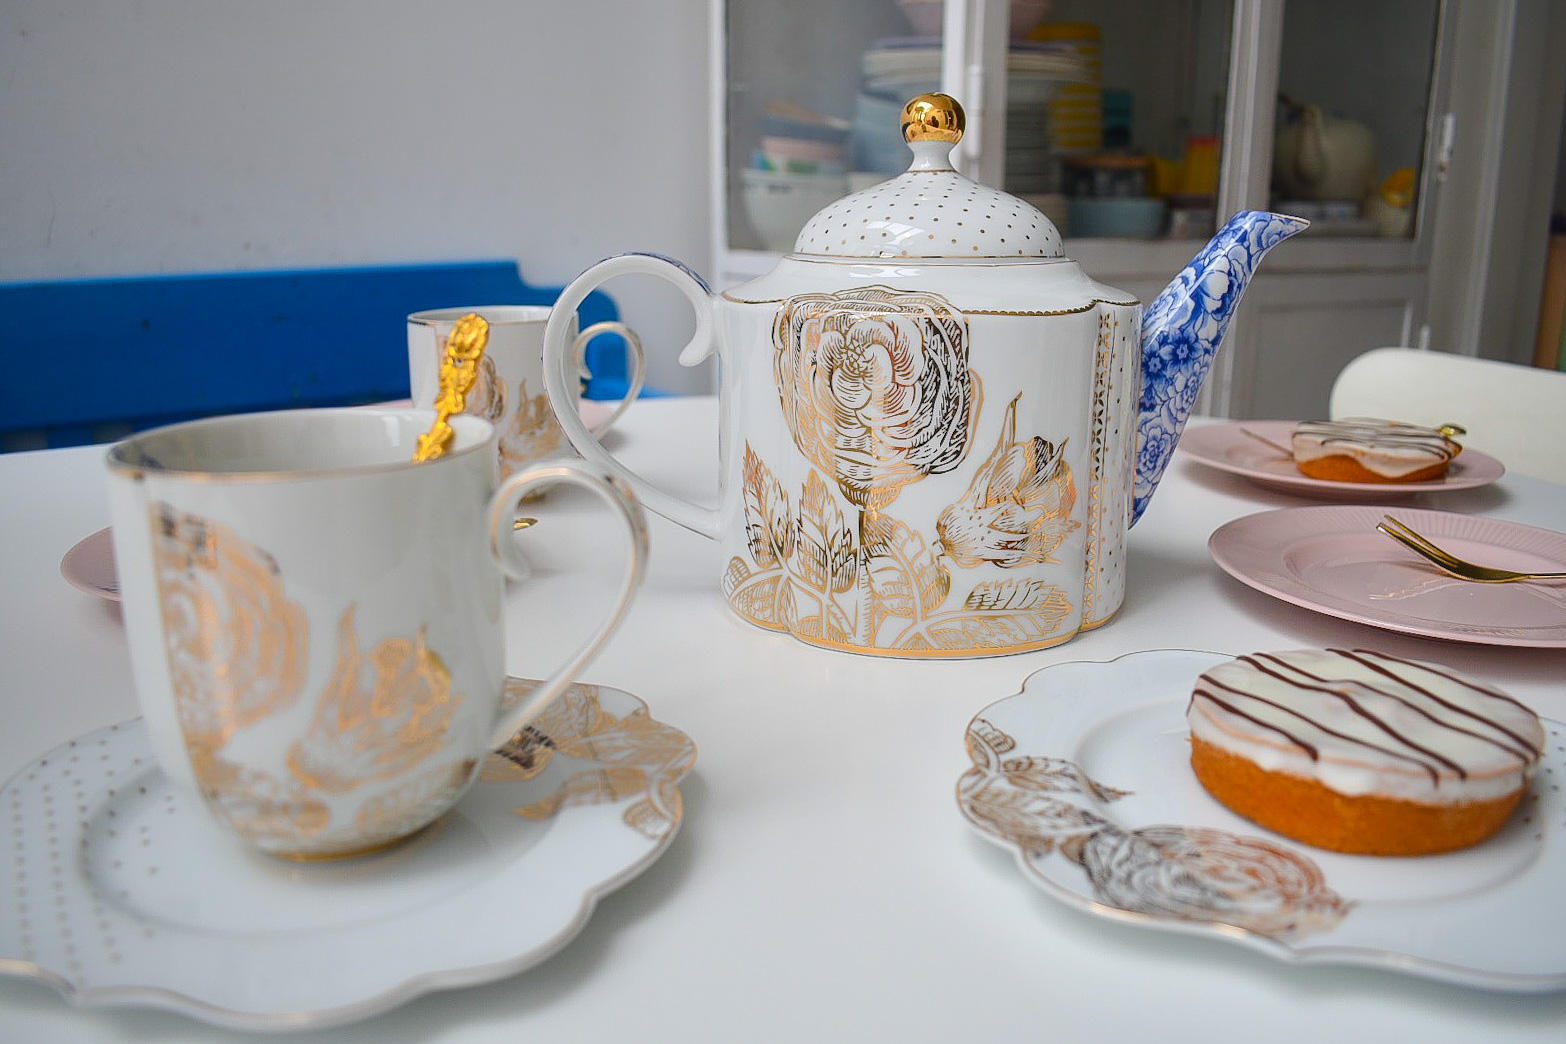 Monet Telemacos documentaire Pip studio design combined with vintage crockery,nl - Keeponstyling